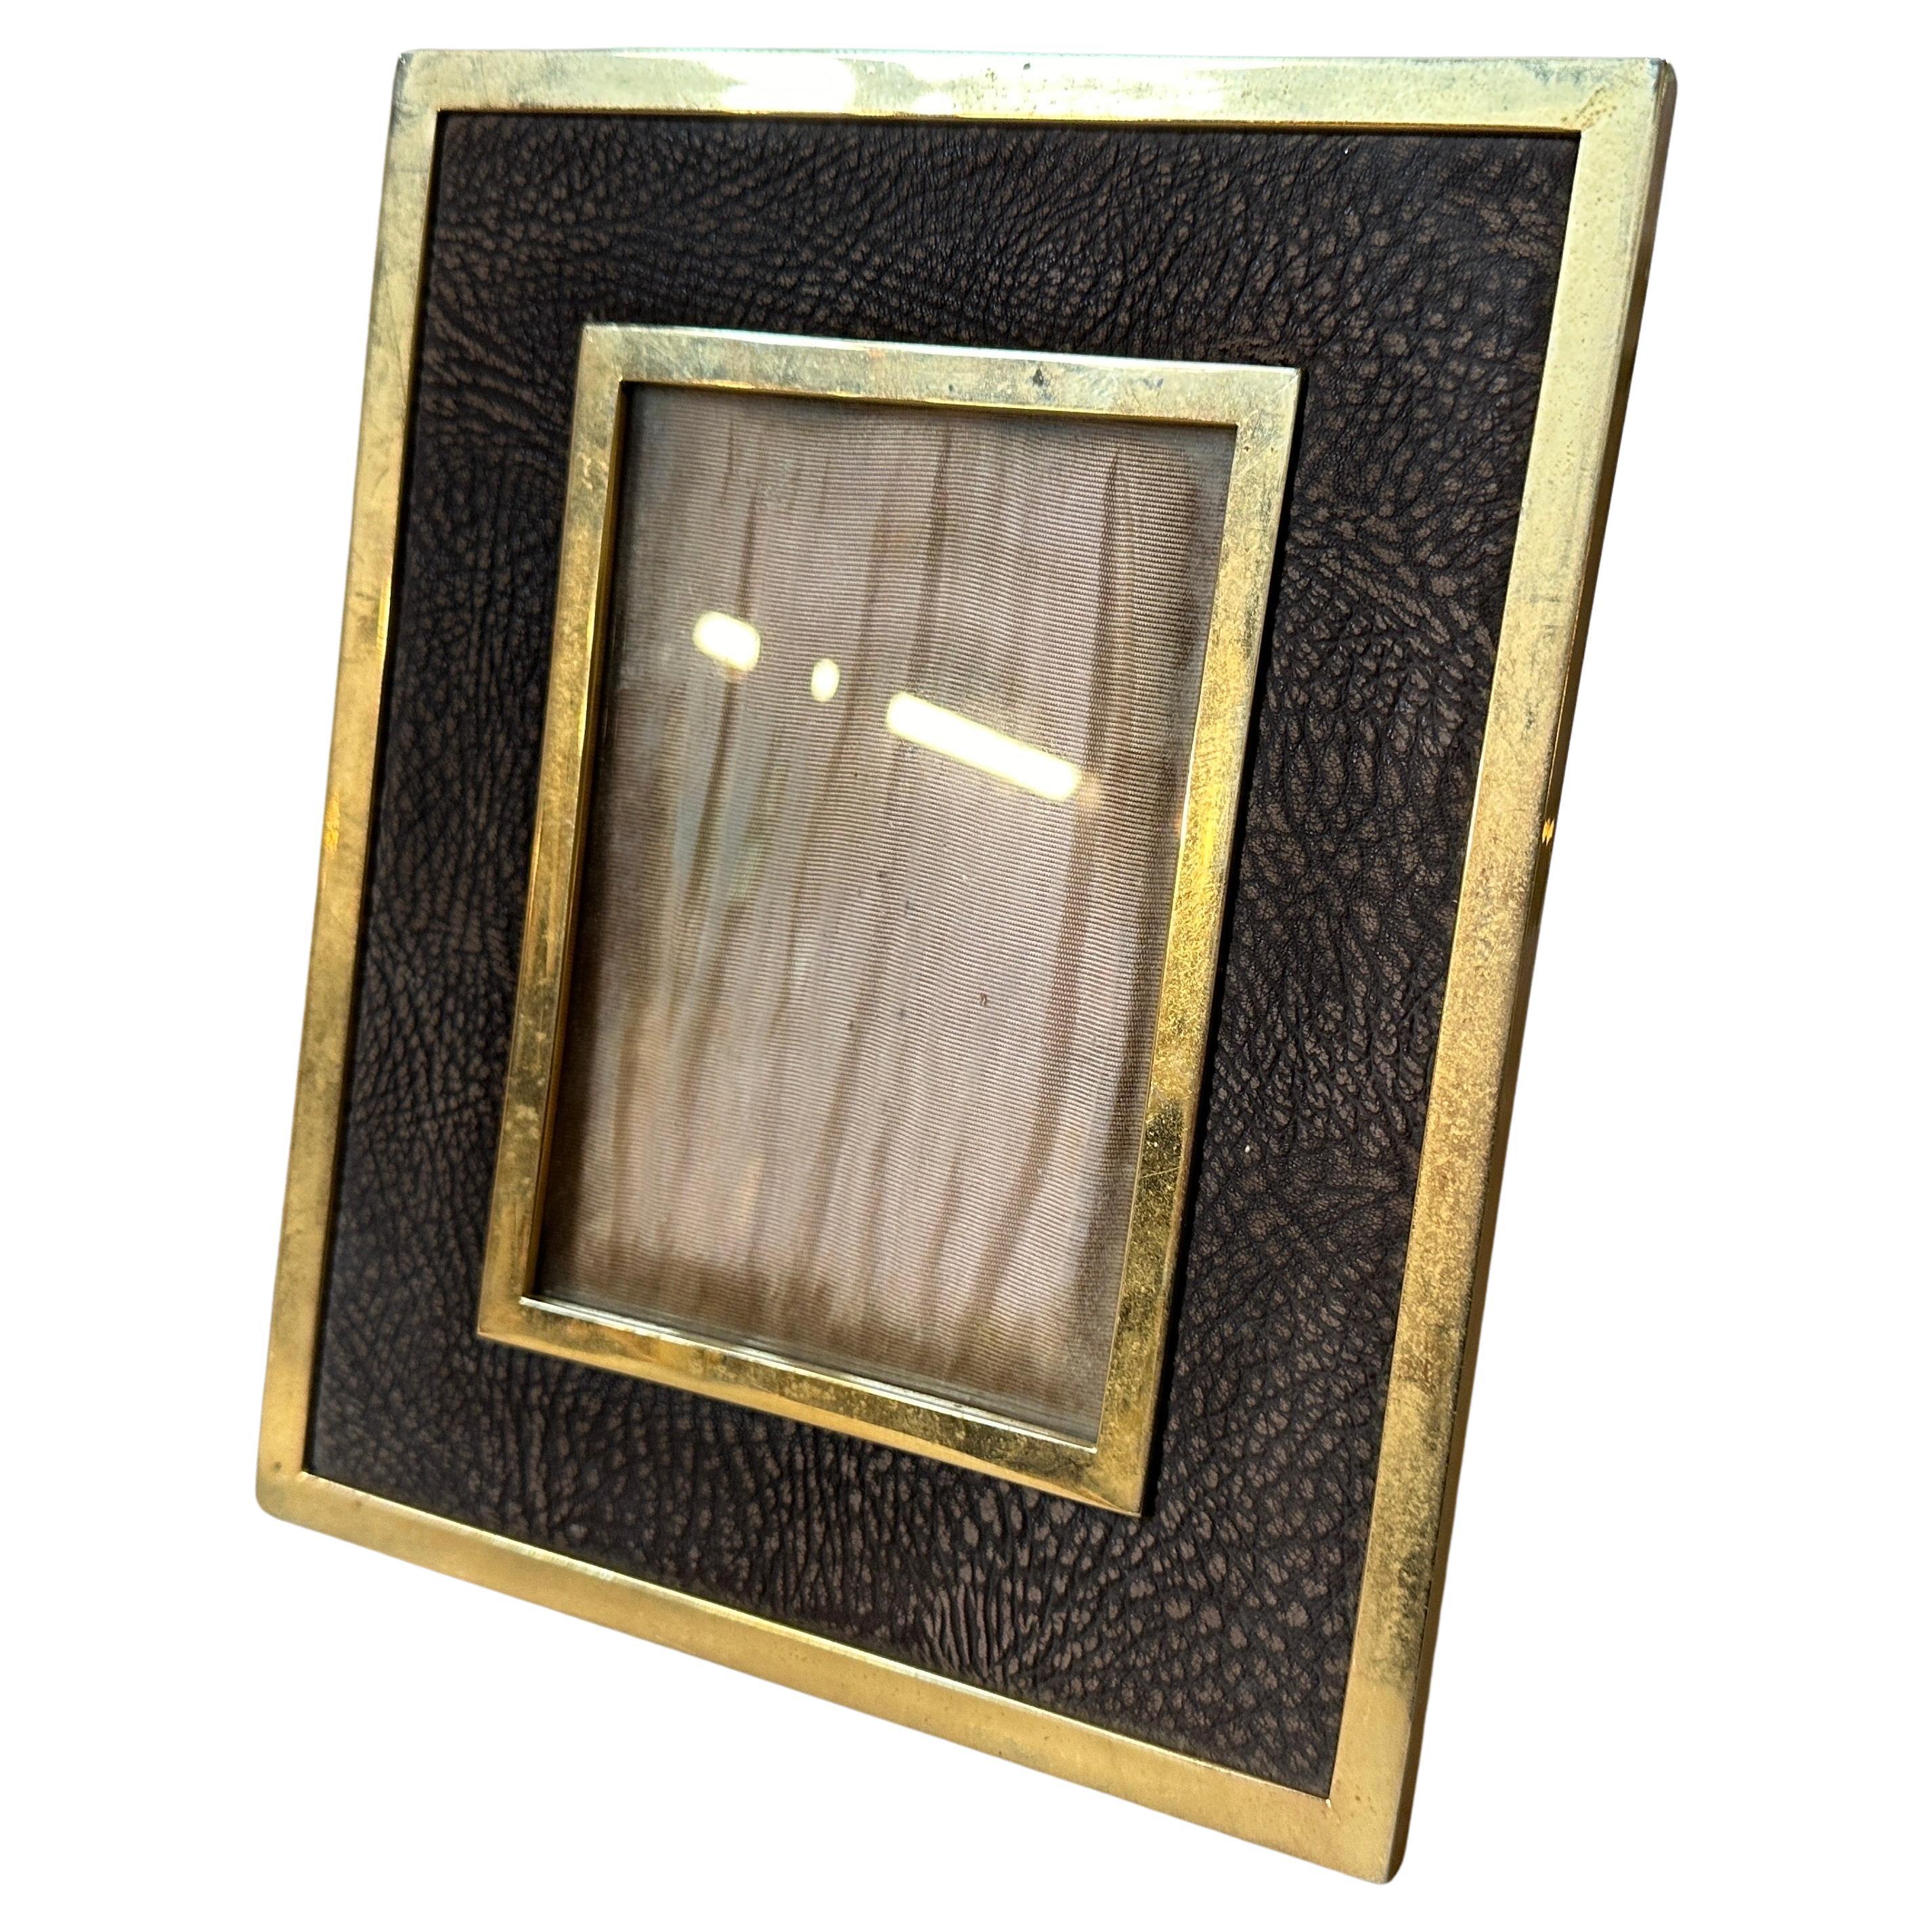 This Italian picture frame exudes elegance and sophistication. Crafted during the height of mid-century design, it showcases a perfect blend of luxurious materials and minimalist aesthetics. The frame boasts a sleek brass construction, a hallmark of